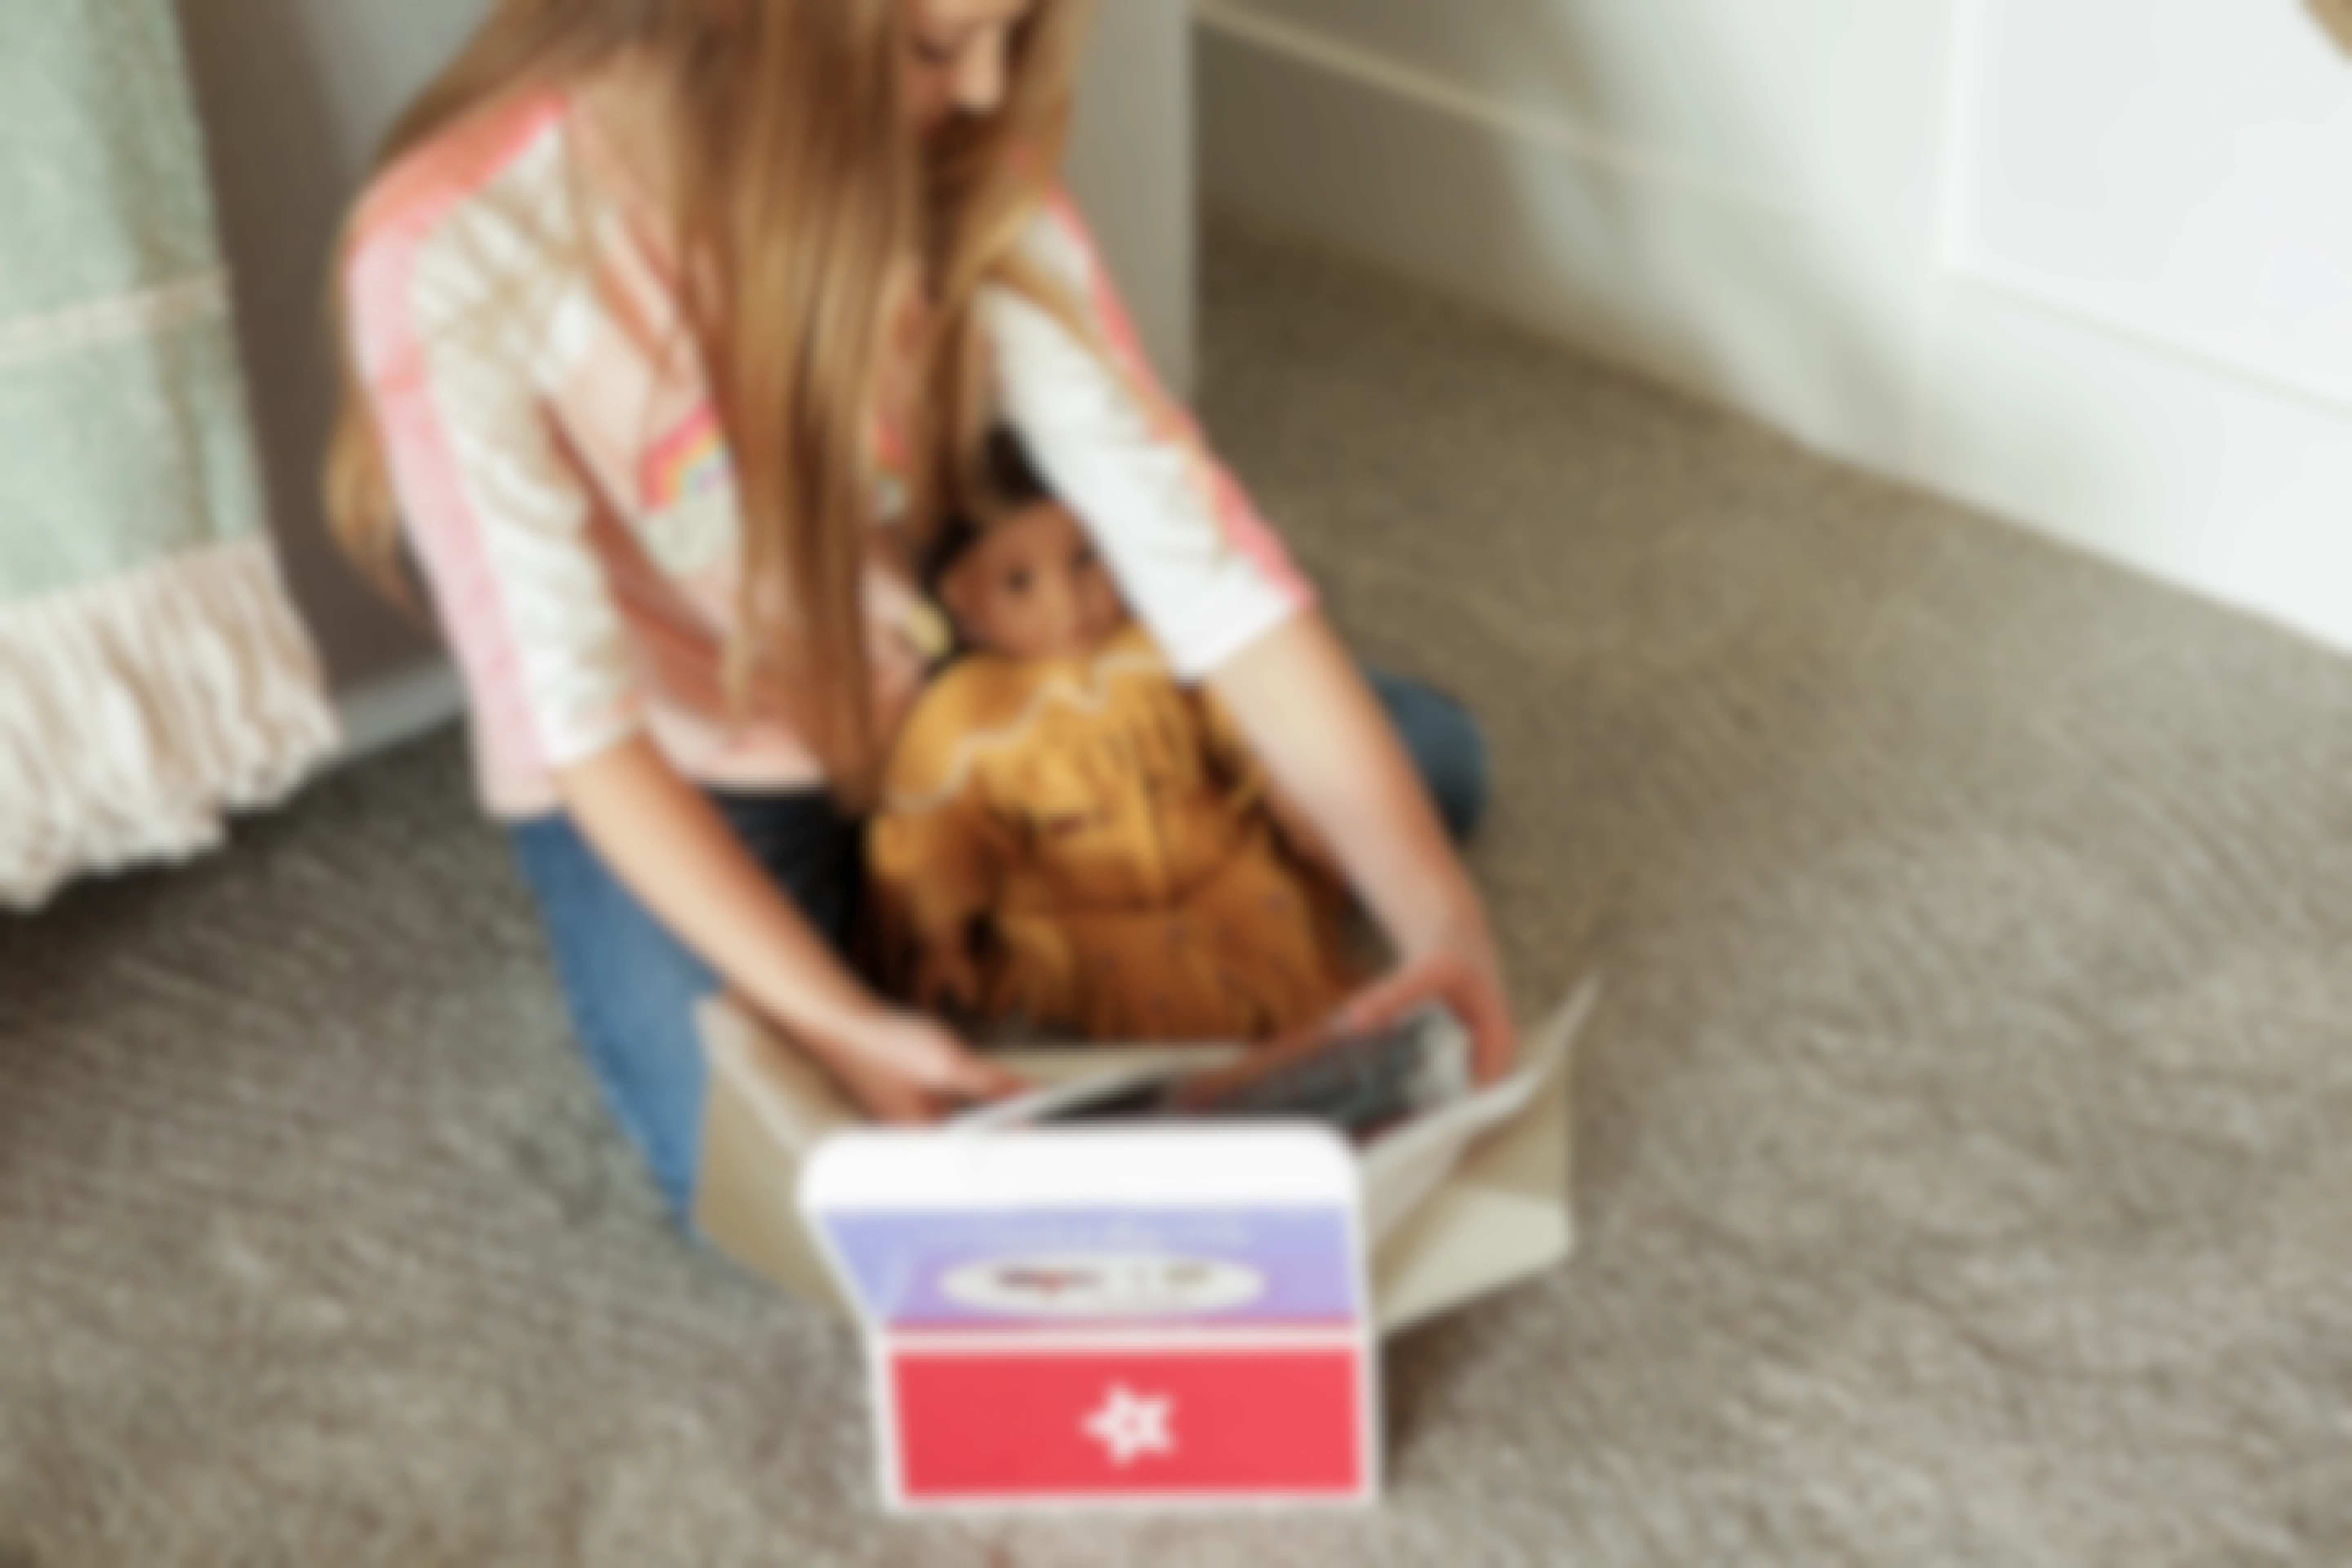 A girl unboxes items from American Girl.